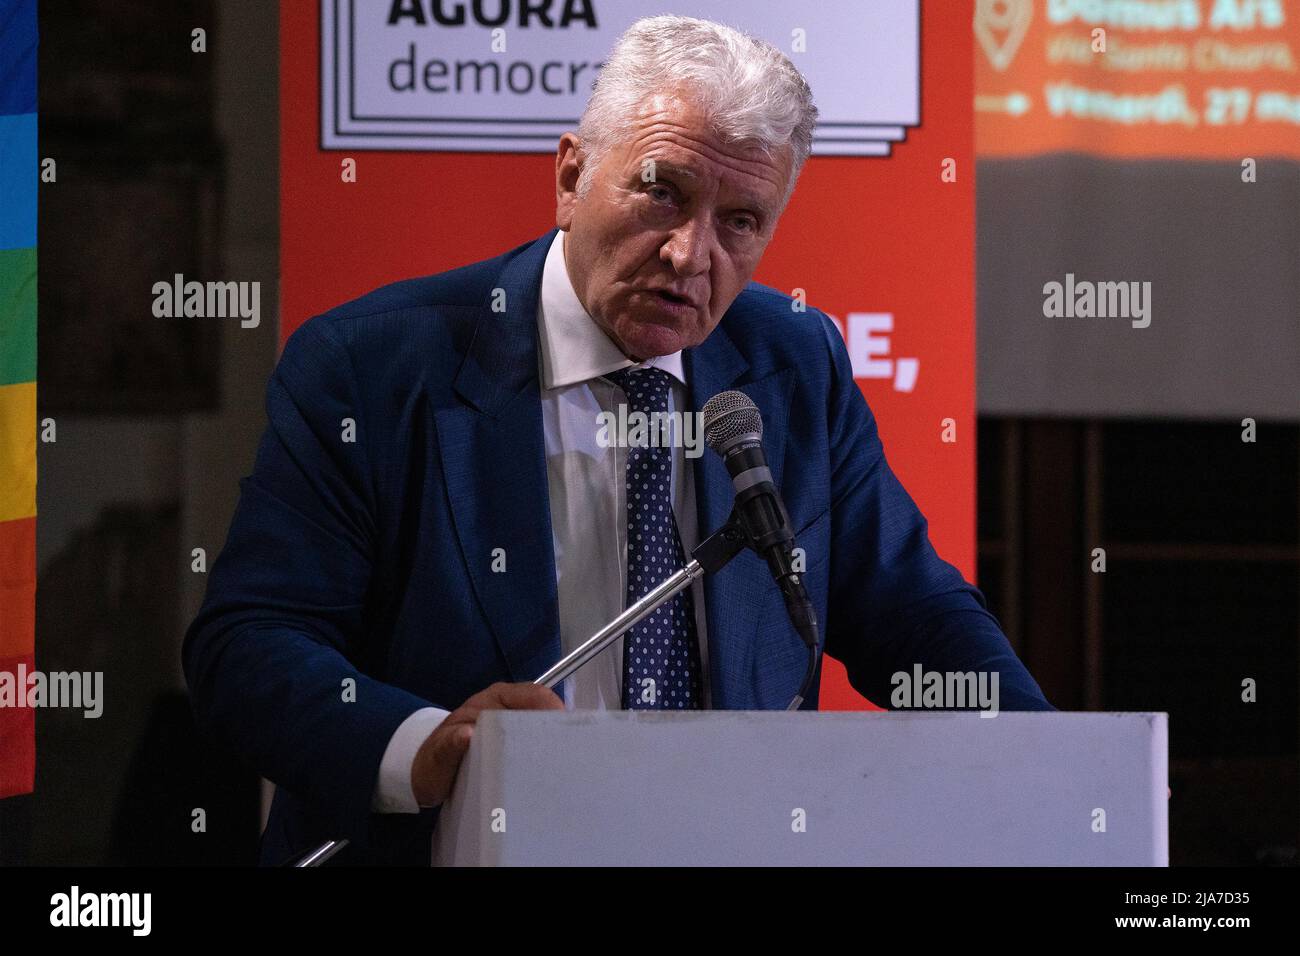 Naples, Italy. 27th May, 2022. Antonio De Iesu, councilor for legality at the Municipality of Naples, during his speech at the conference 'Naples free from the Camorra' held on May 27, 2022 at the Domus Ars Center for Music and Culture in Naples. Credit: Independent Photo Agency/Alamy Live News Stock Photo